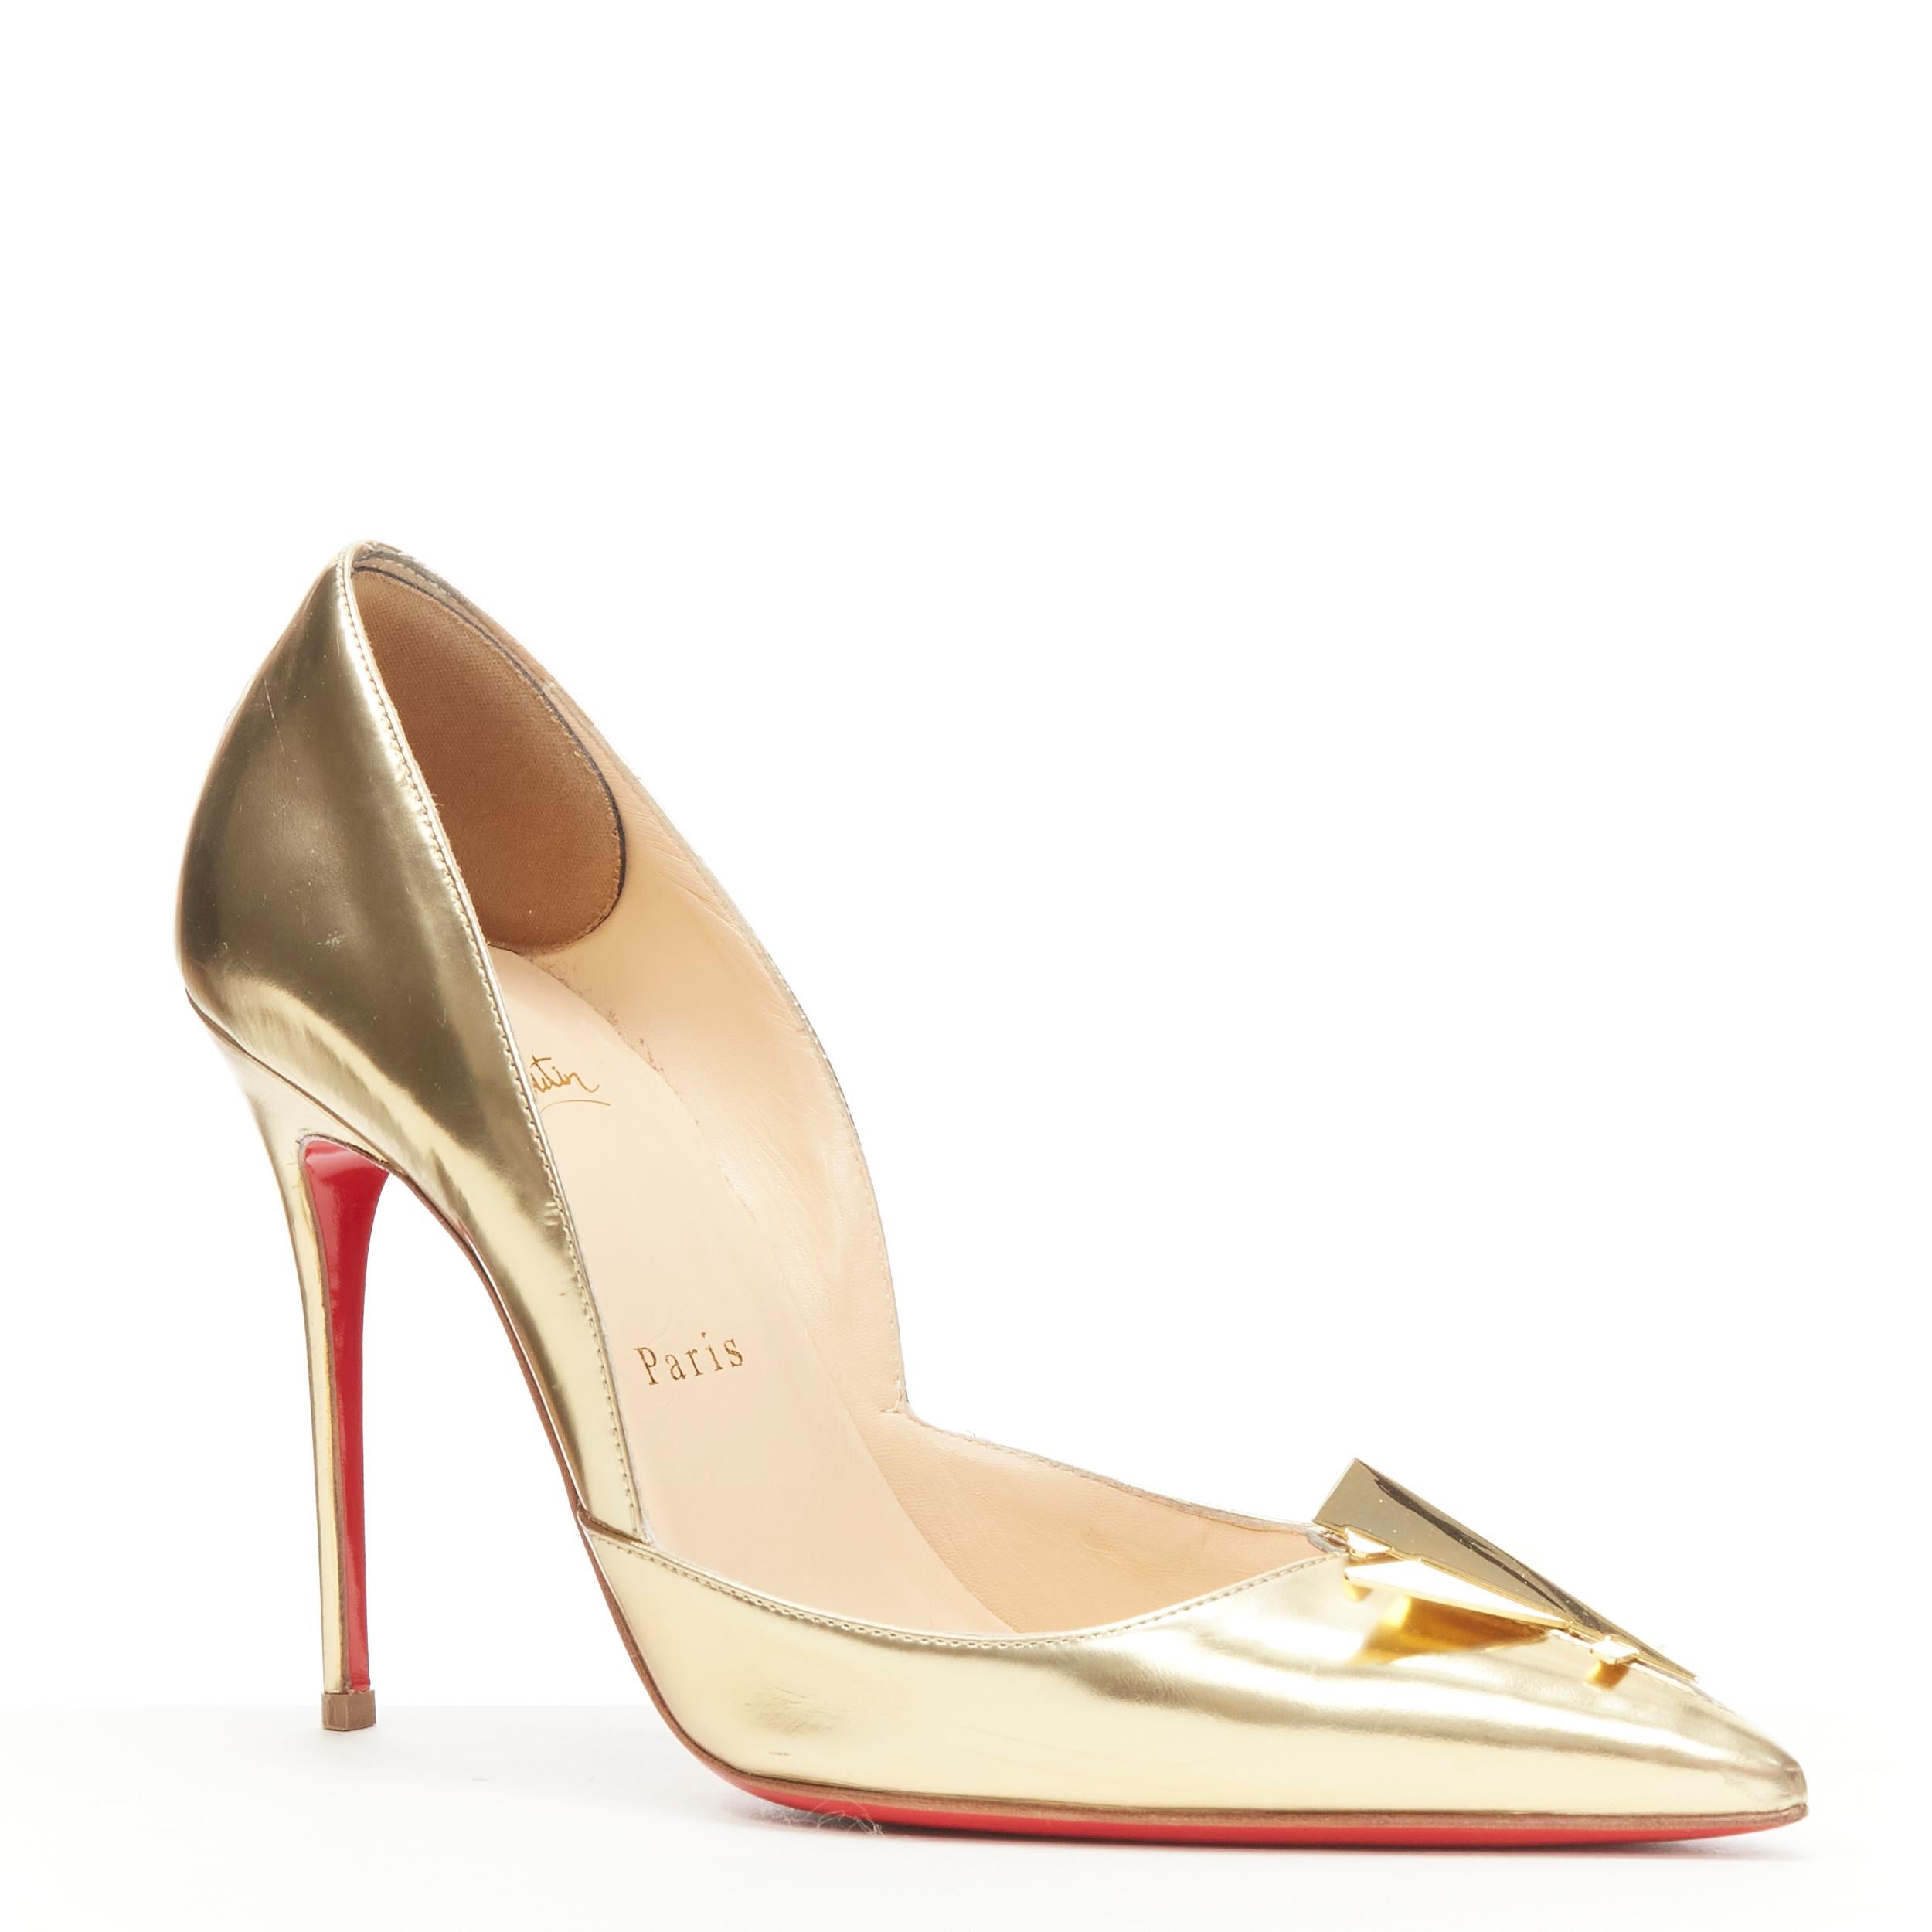 CHRISTIAN LOUBOUTIN Mrs Fuse 100 metallic gold mirrored plate pump EU38 
Reference: KEDG/A00128 
Brand: Christian Louboutin 
Model: Mrs Fuse 100 
Material: Leather 
Color: Gold 
Pattern: Solid 
Extra Detail: Mirrored silver leather upper. Gold-tone